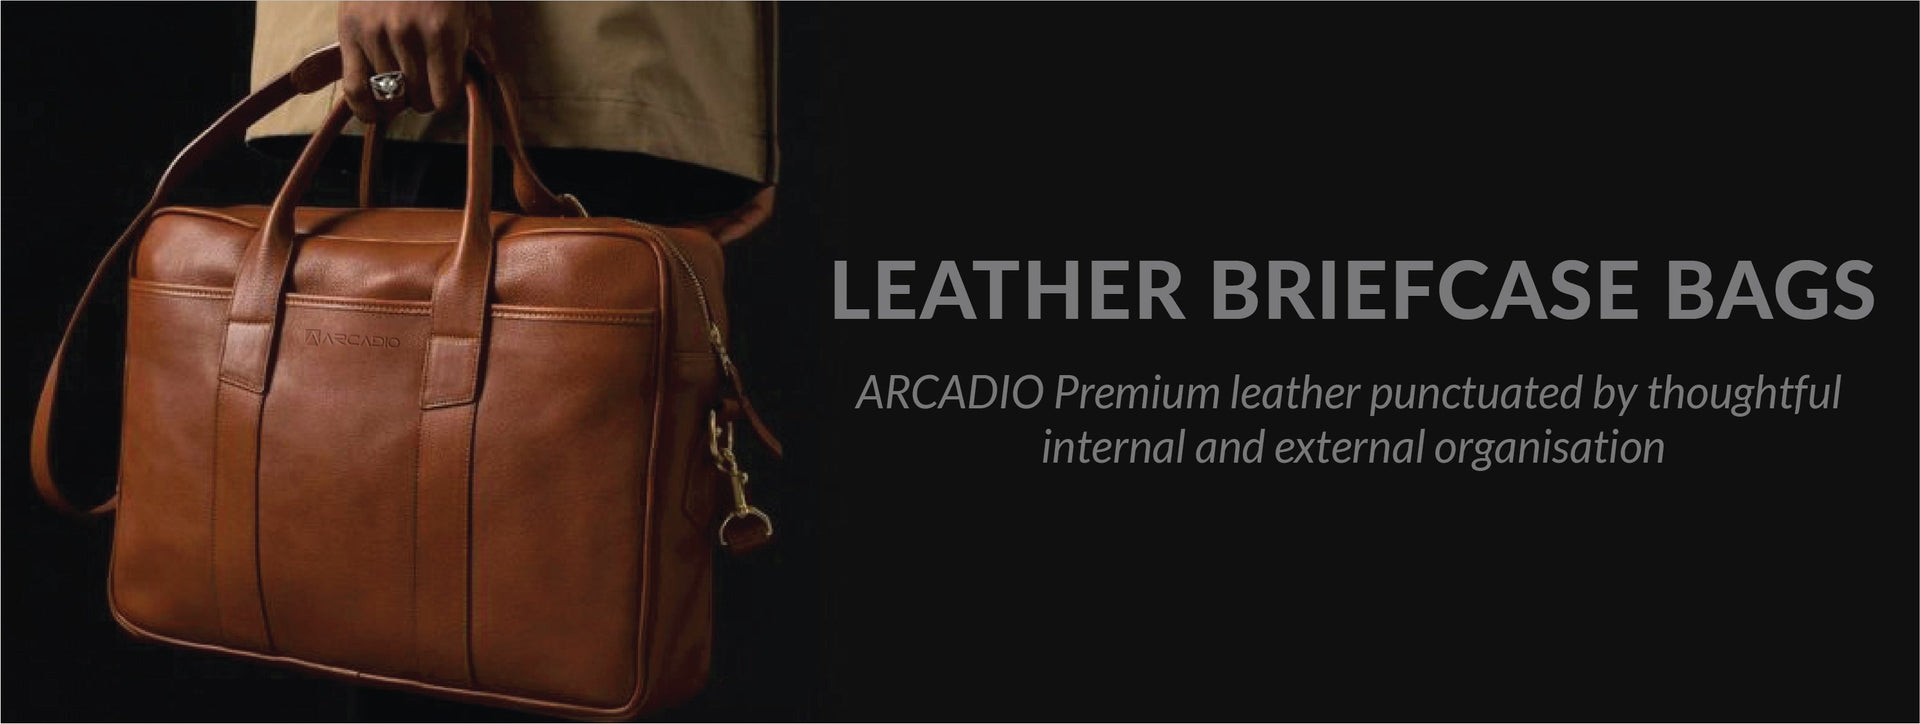 LEATHER Briefcase Bags ARCADIO